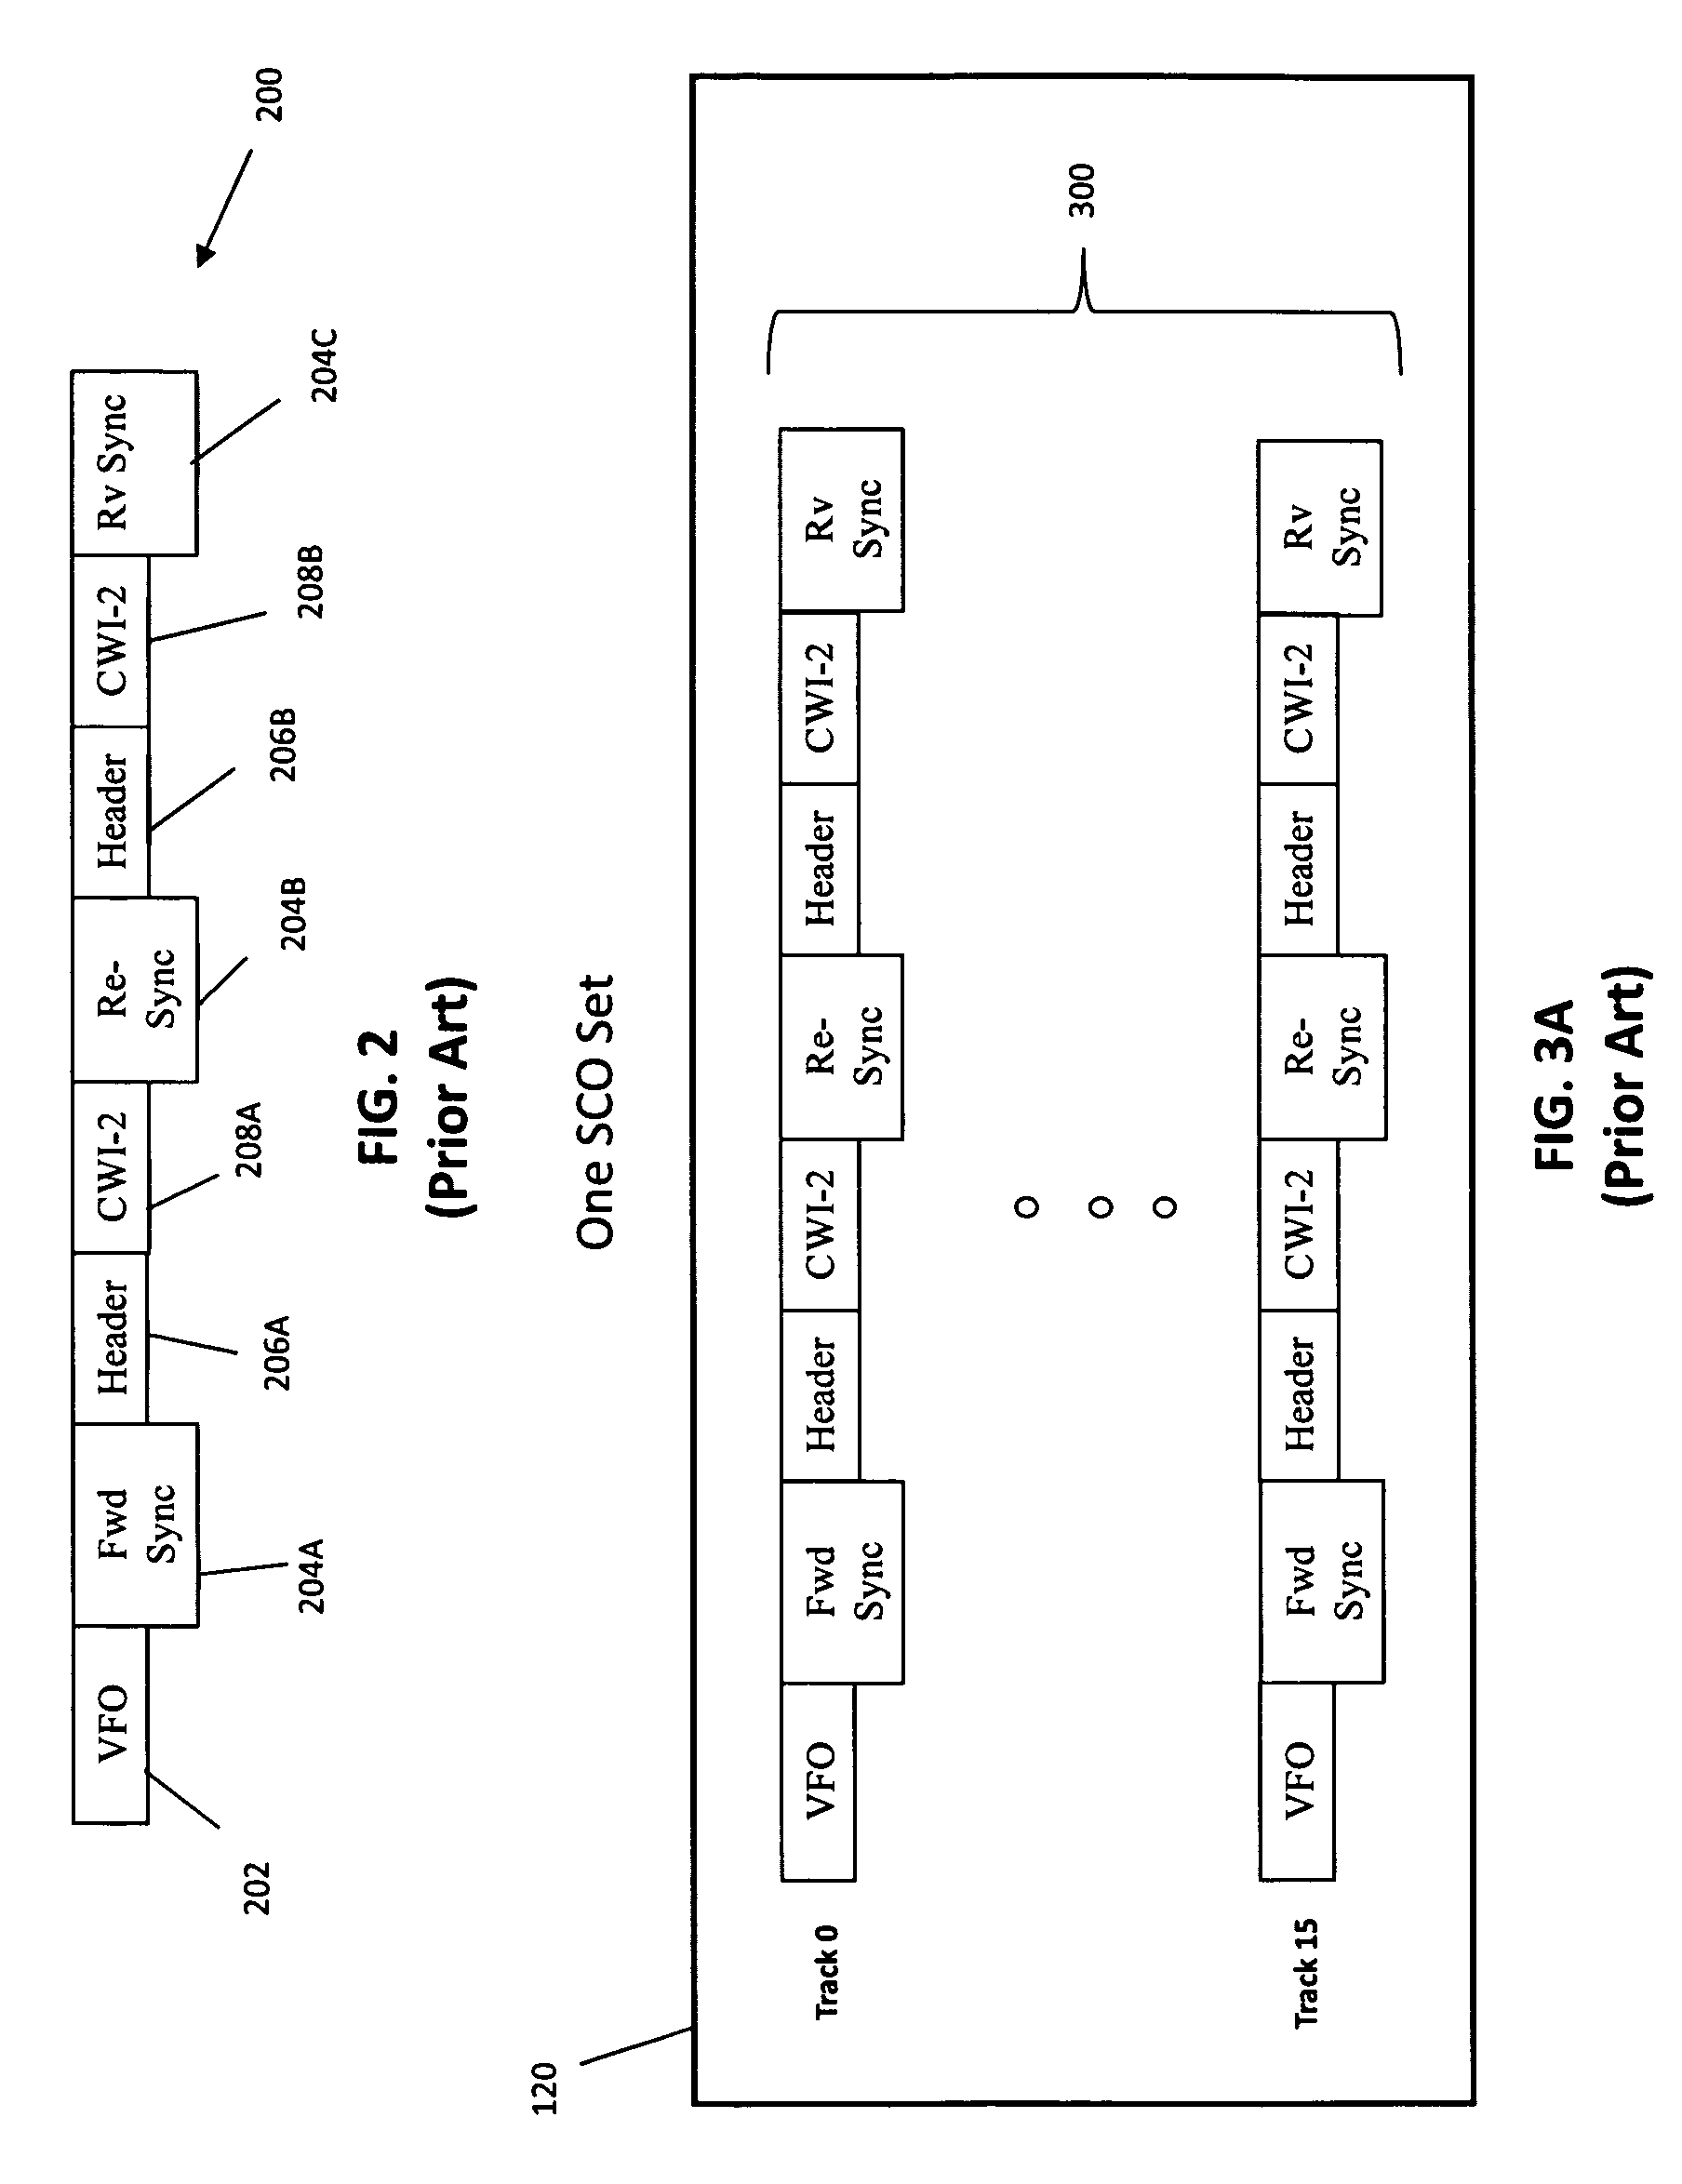 Rewriting codeword objects to magnetic data tape upon detection of an error